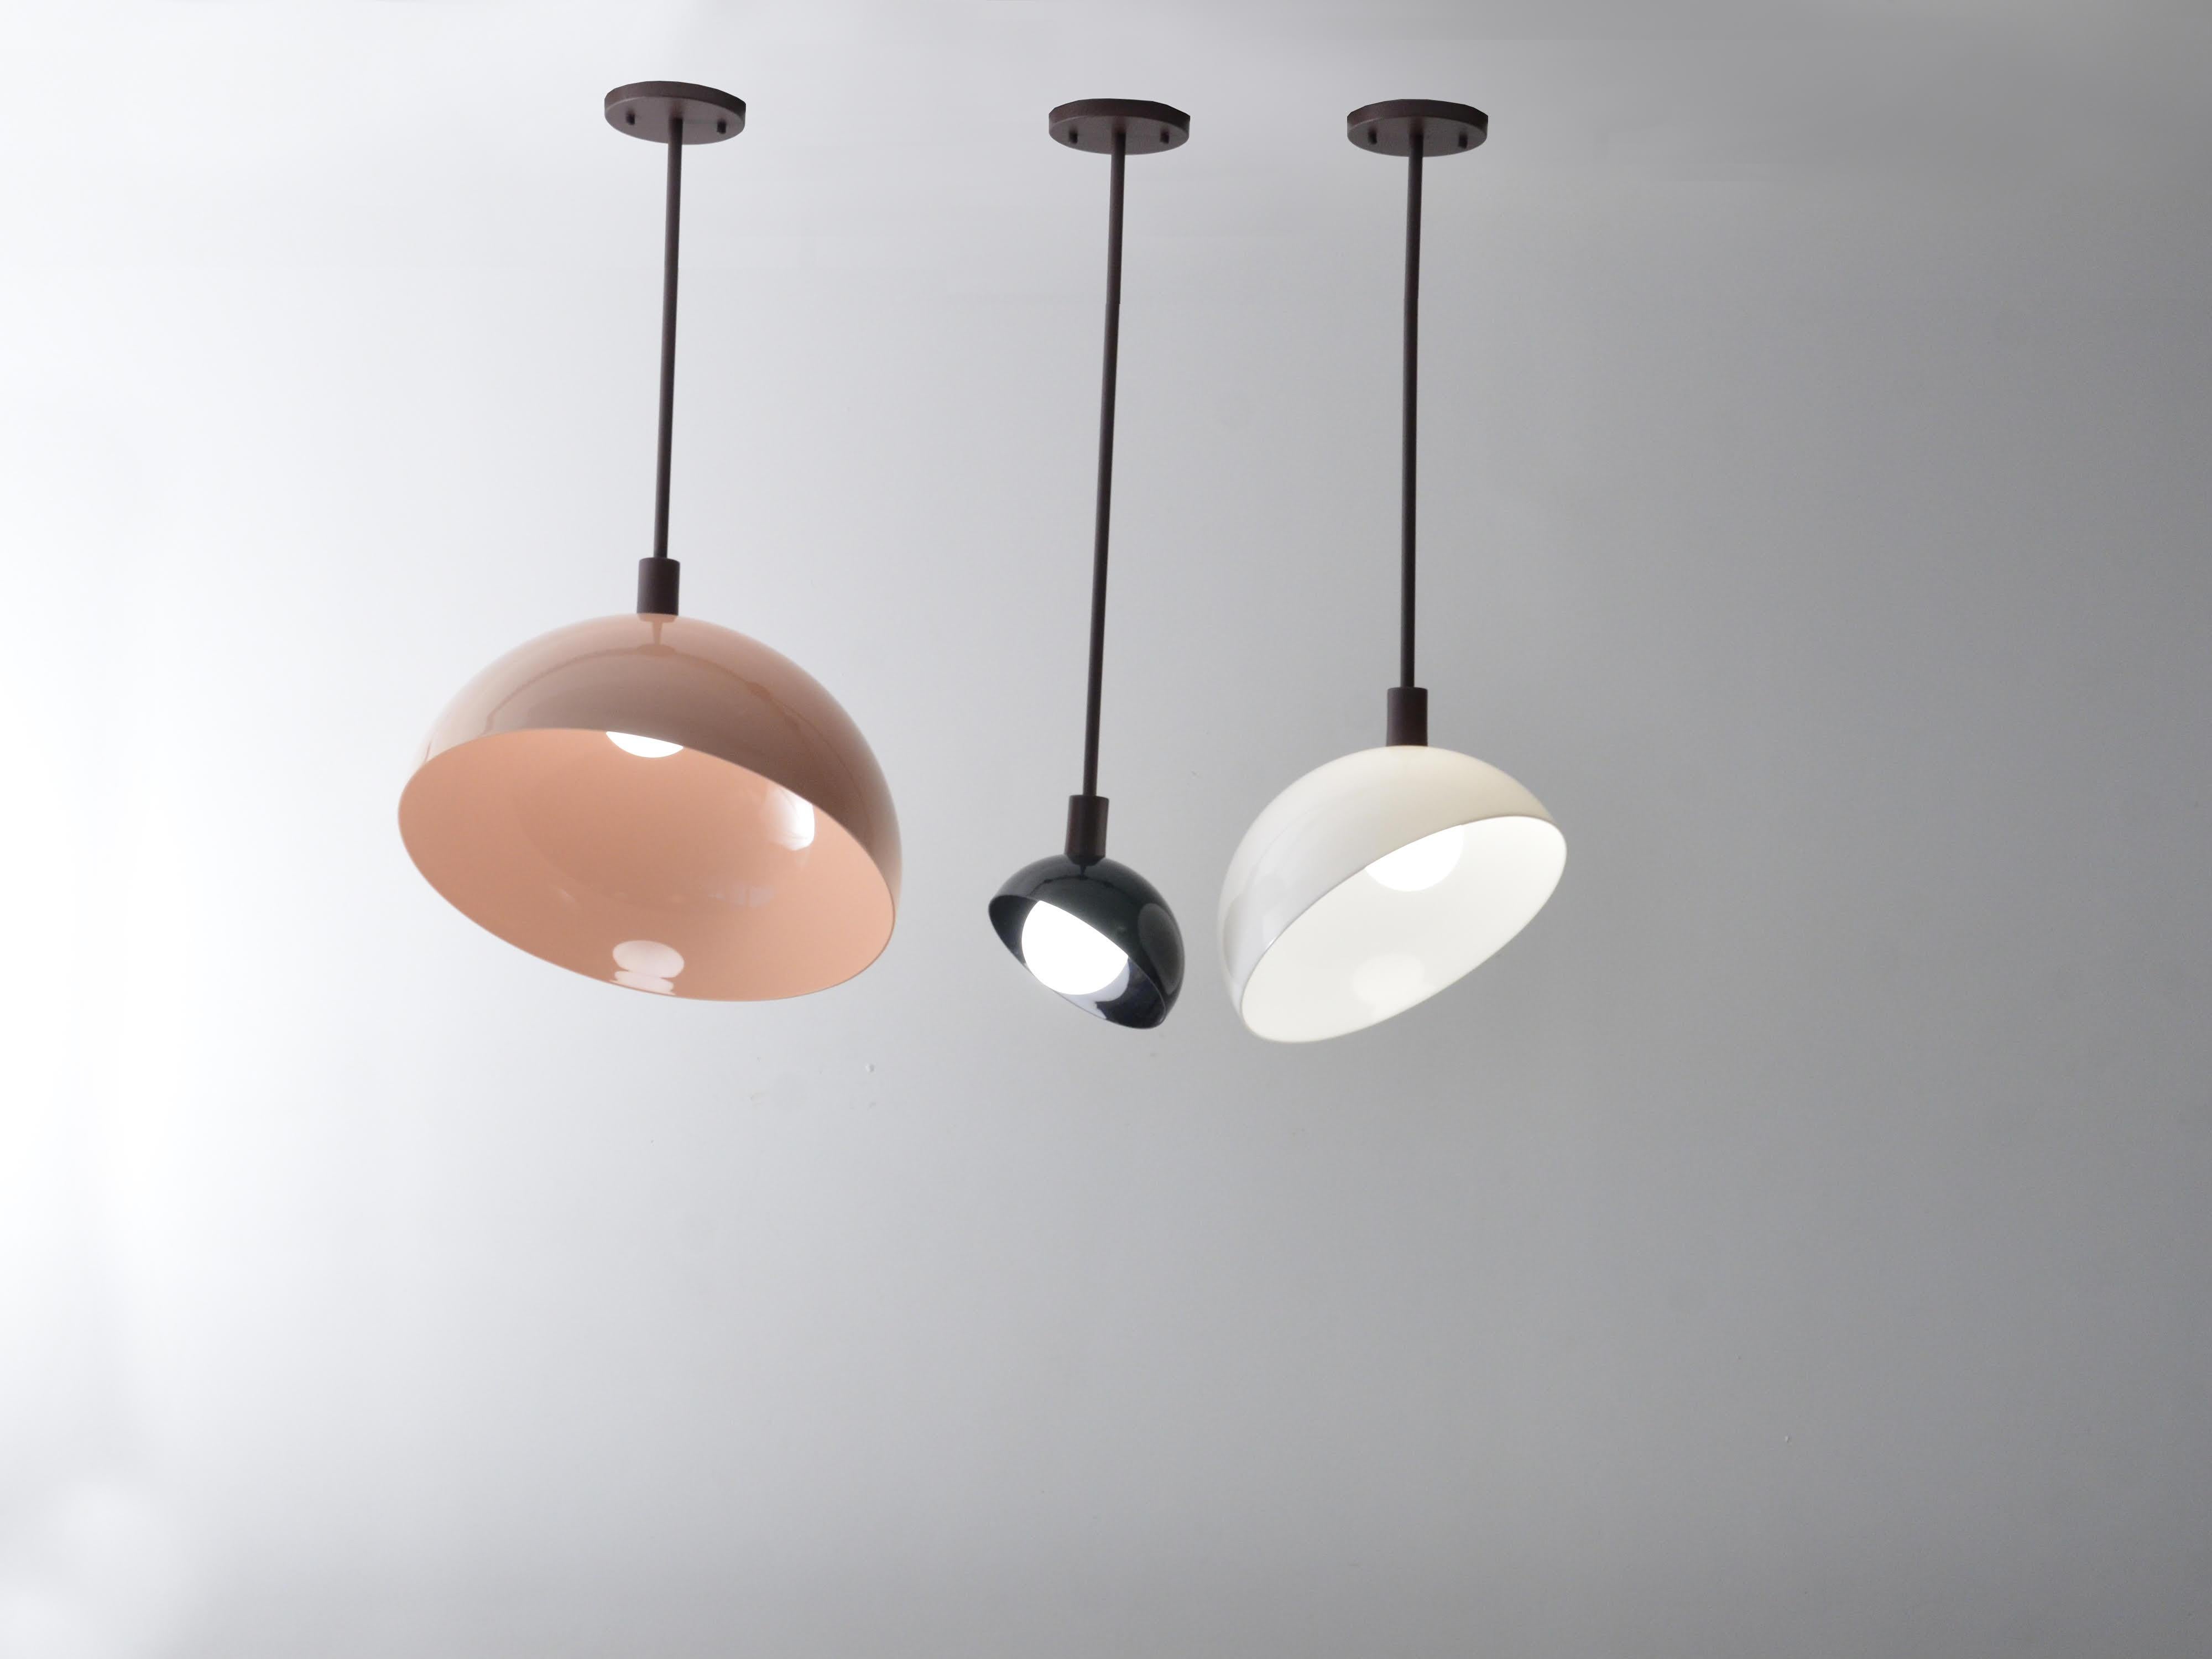 The Lichia Haste pendant has a modern design. It's structure is made of black, white or corten steel. It has one light difusor in a round shape, made of acrylic, which can be the colors milky, nude, smoked or black, where there's a translucent round